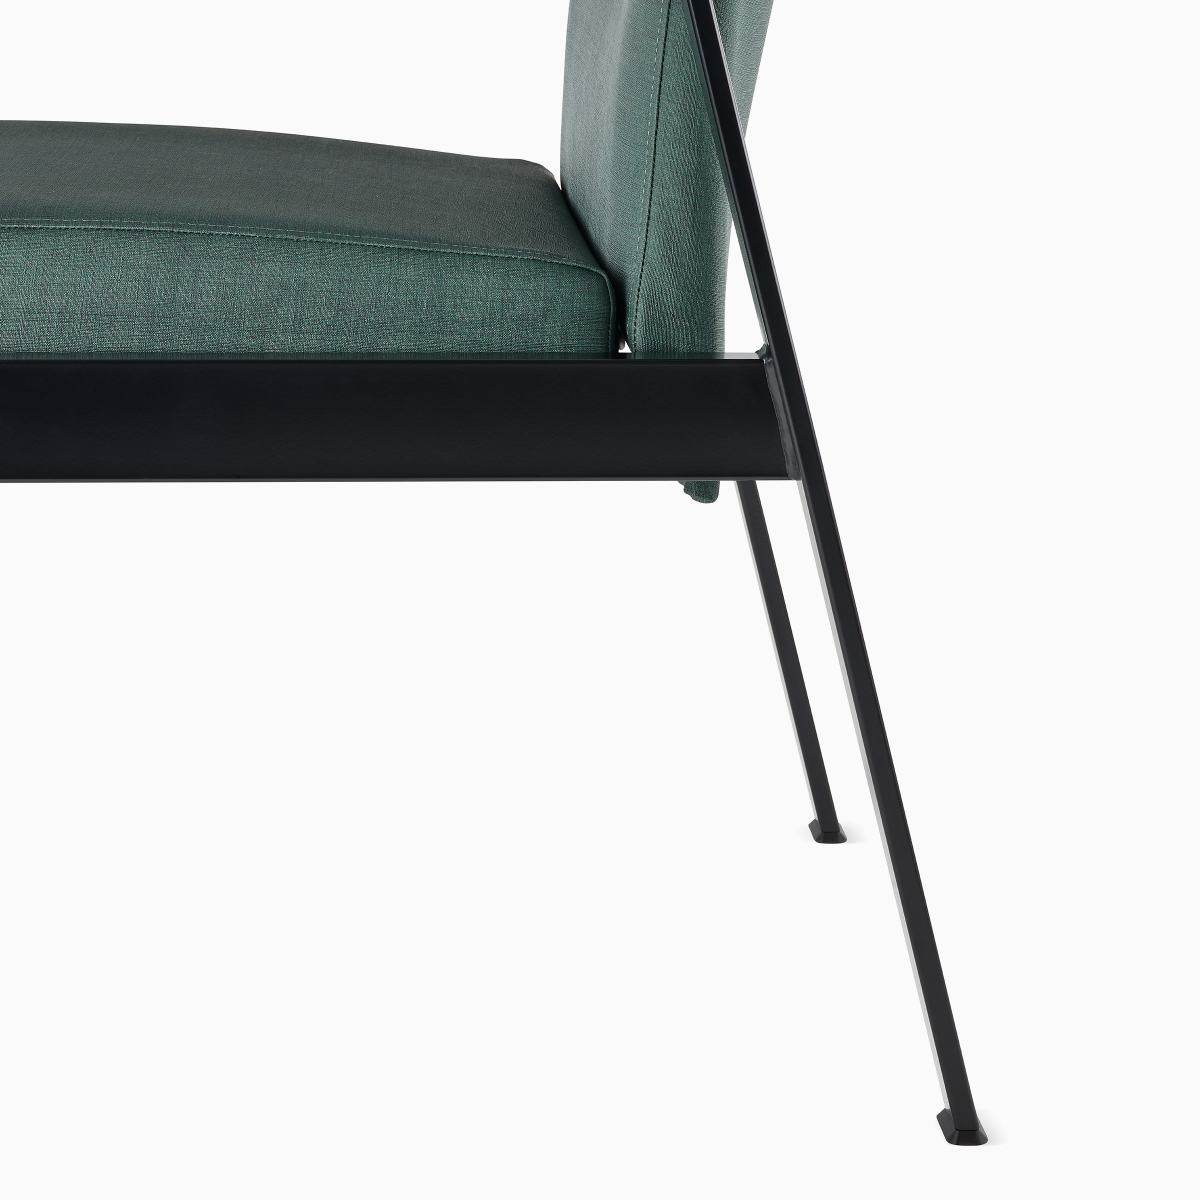 A detail of the wall-saver leg and glide on an Easton chair in a black finish.